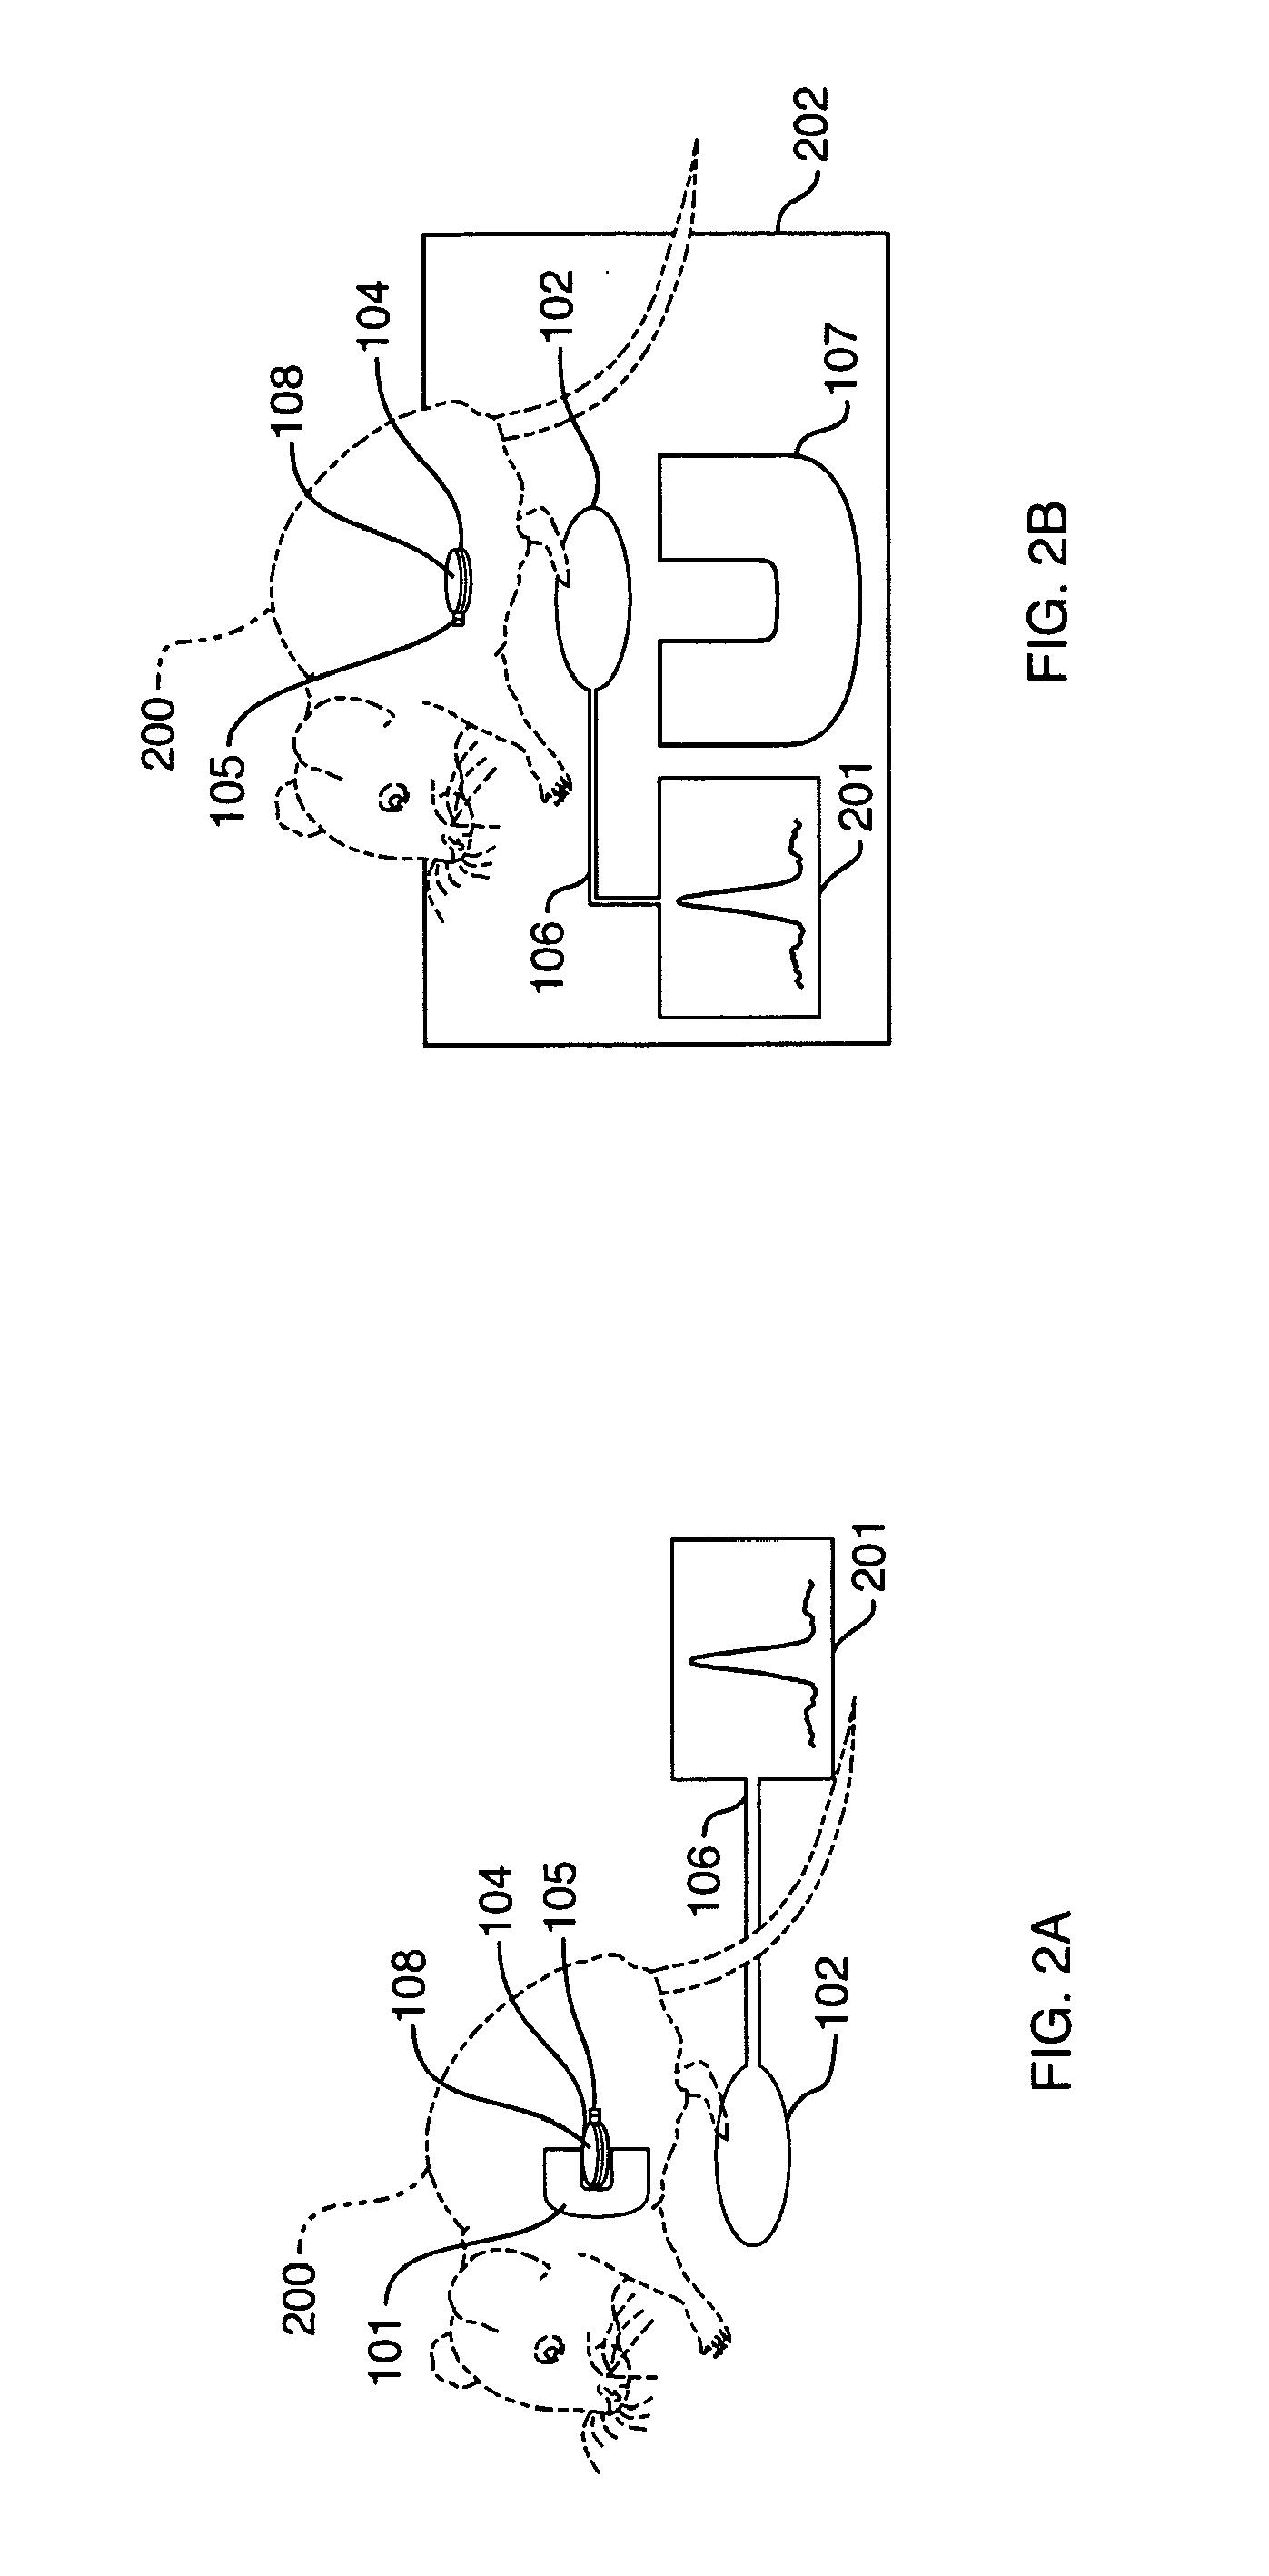 Magnetic resonance system with implantable components and methods of use thereof